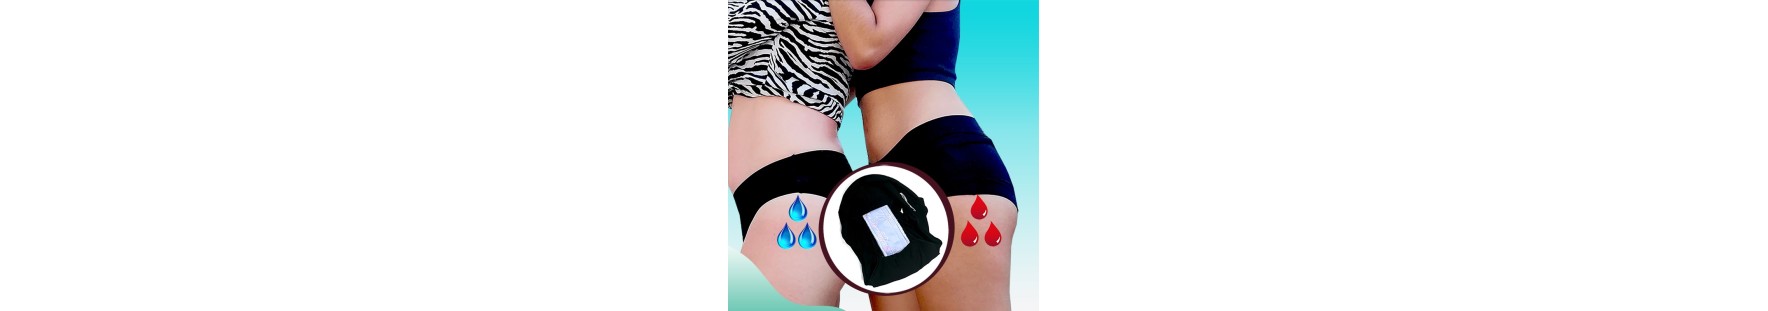 Shop for Leakproof Underwear for menstruation and mild incontinence